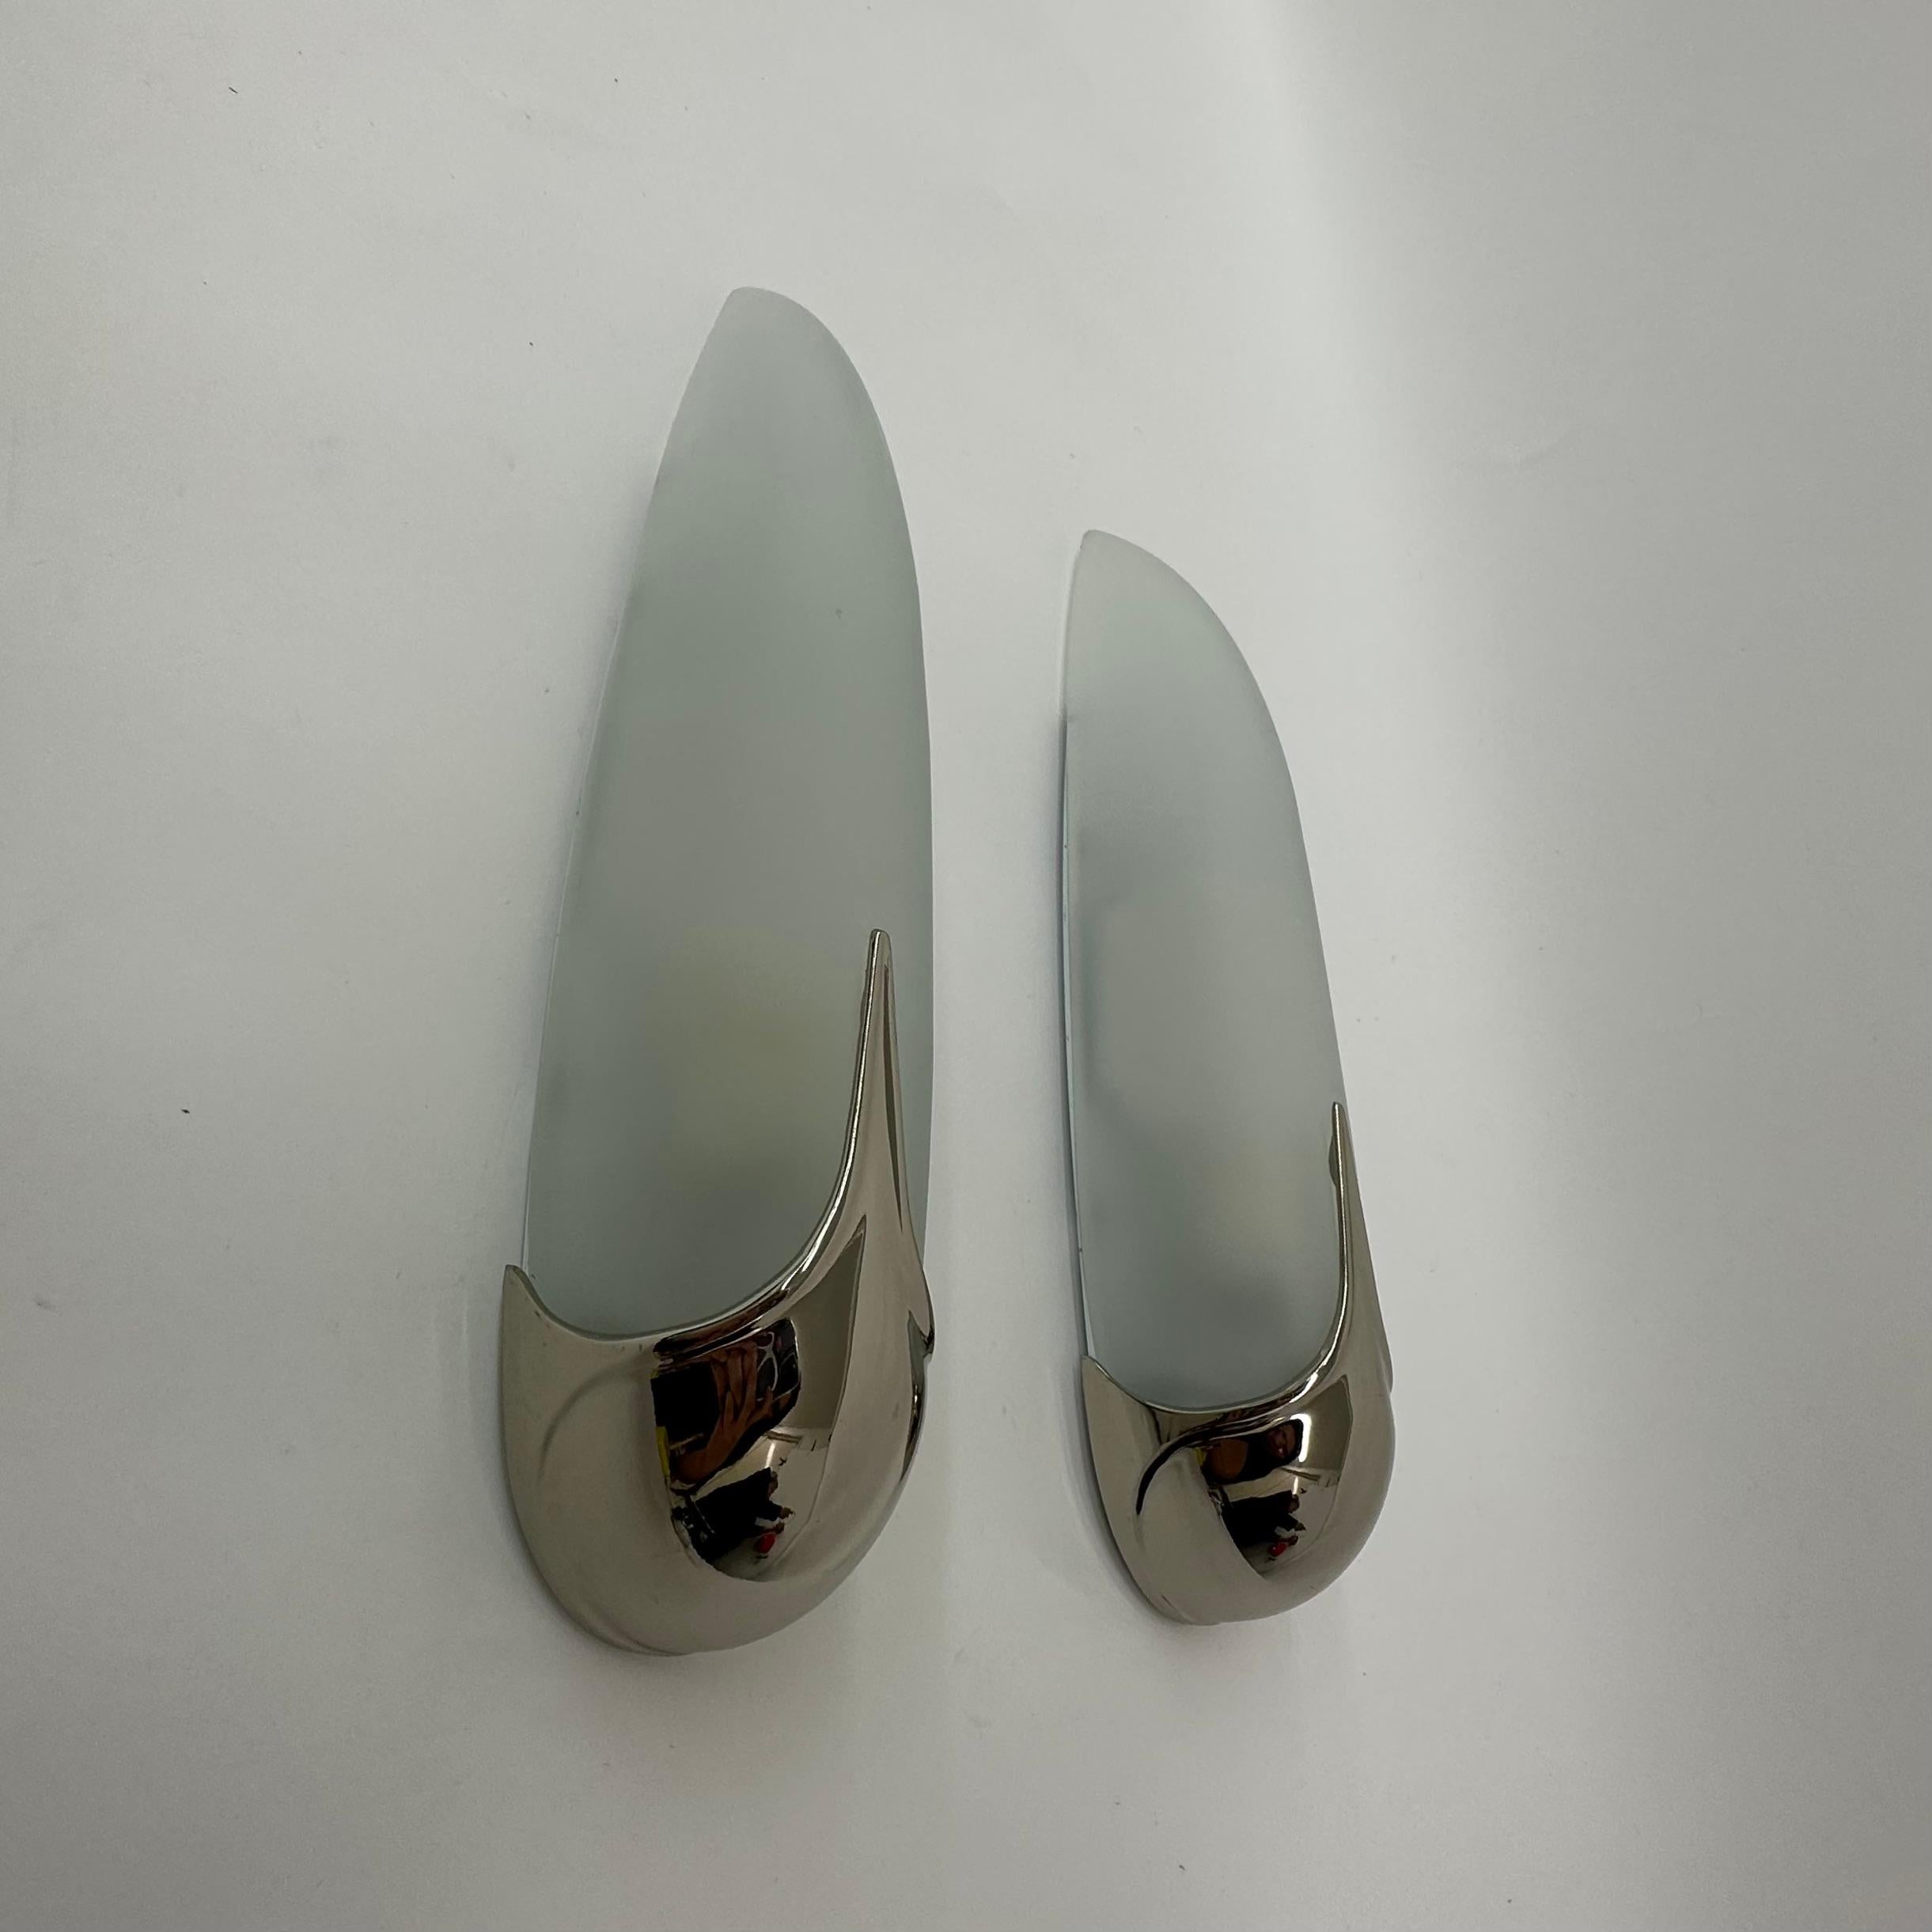 Pair of Idearte Sconces Wall Lamps, Spain, 1980s For Sale 7